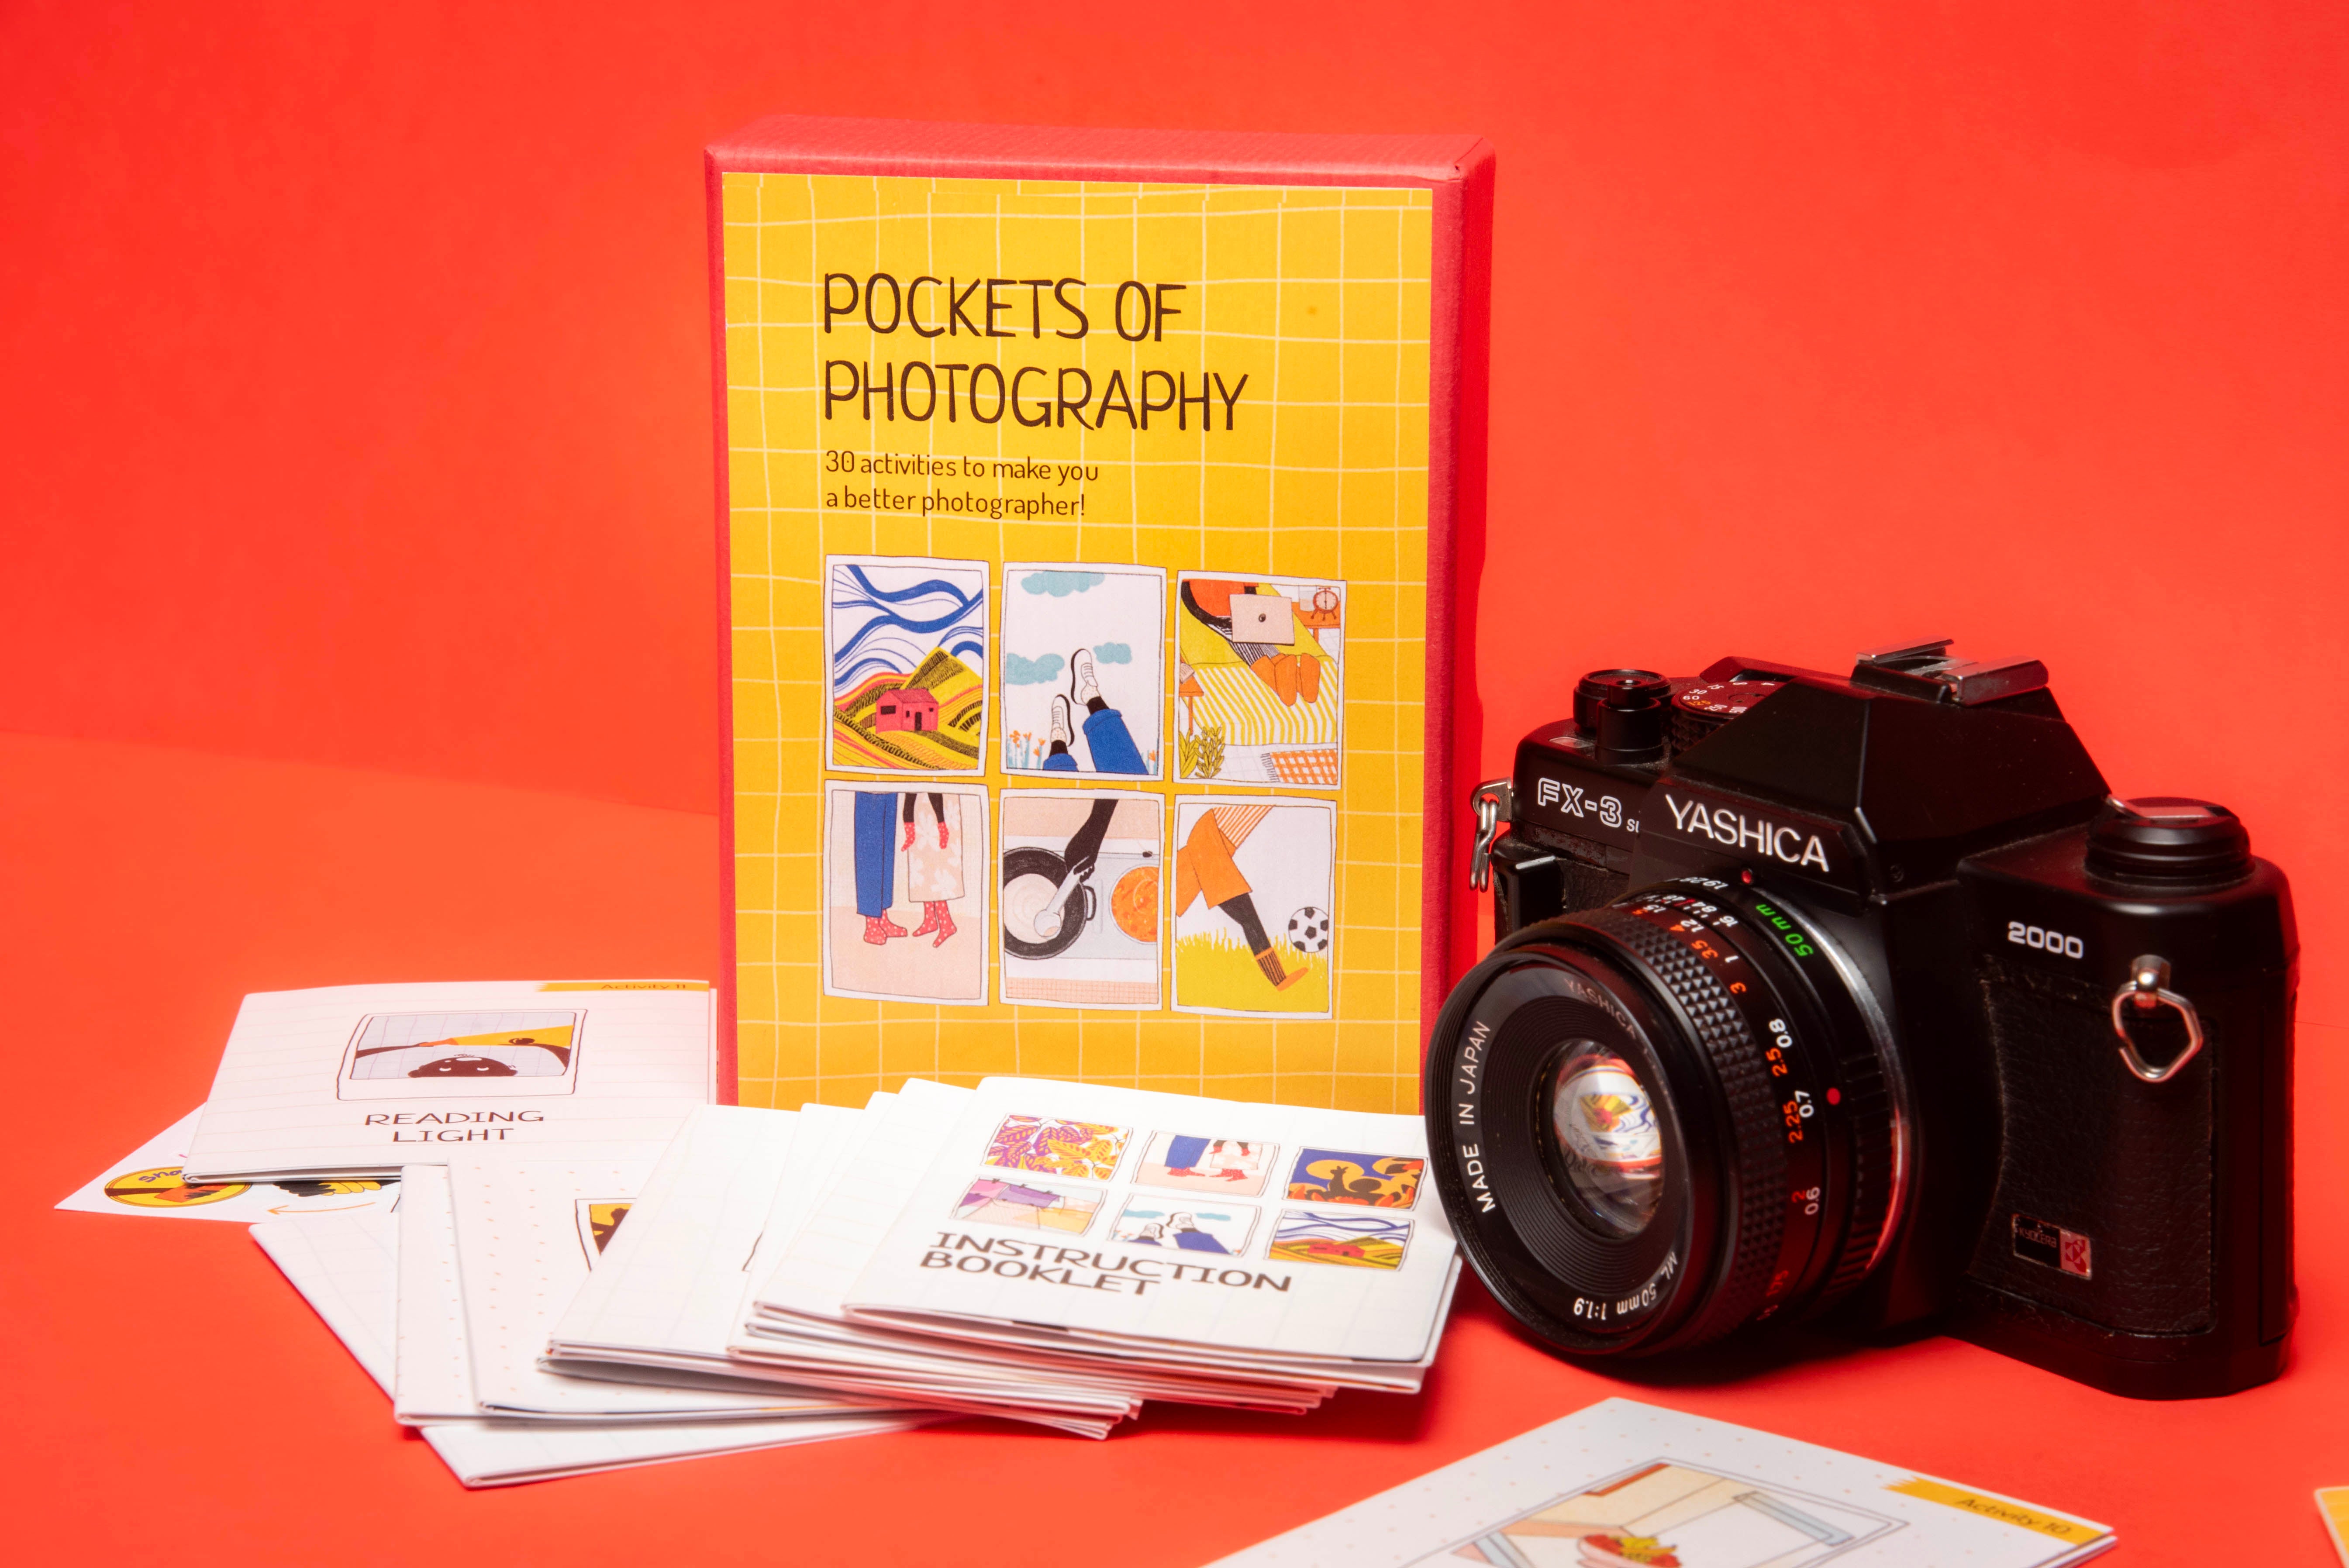 Pockets of Photography - 30 Photography challenges to make you a better photographer!